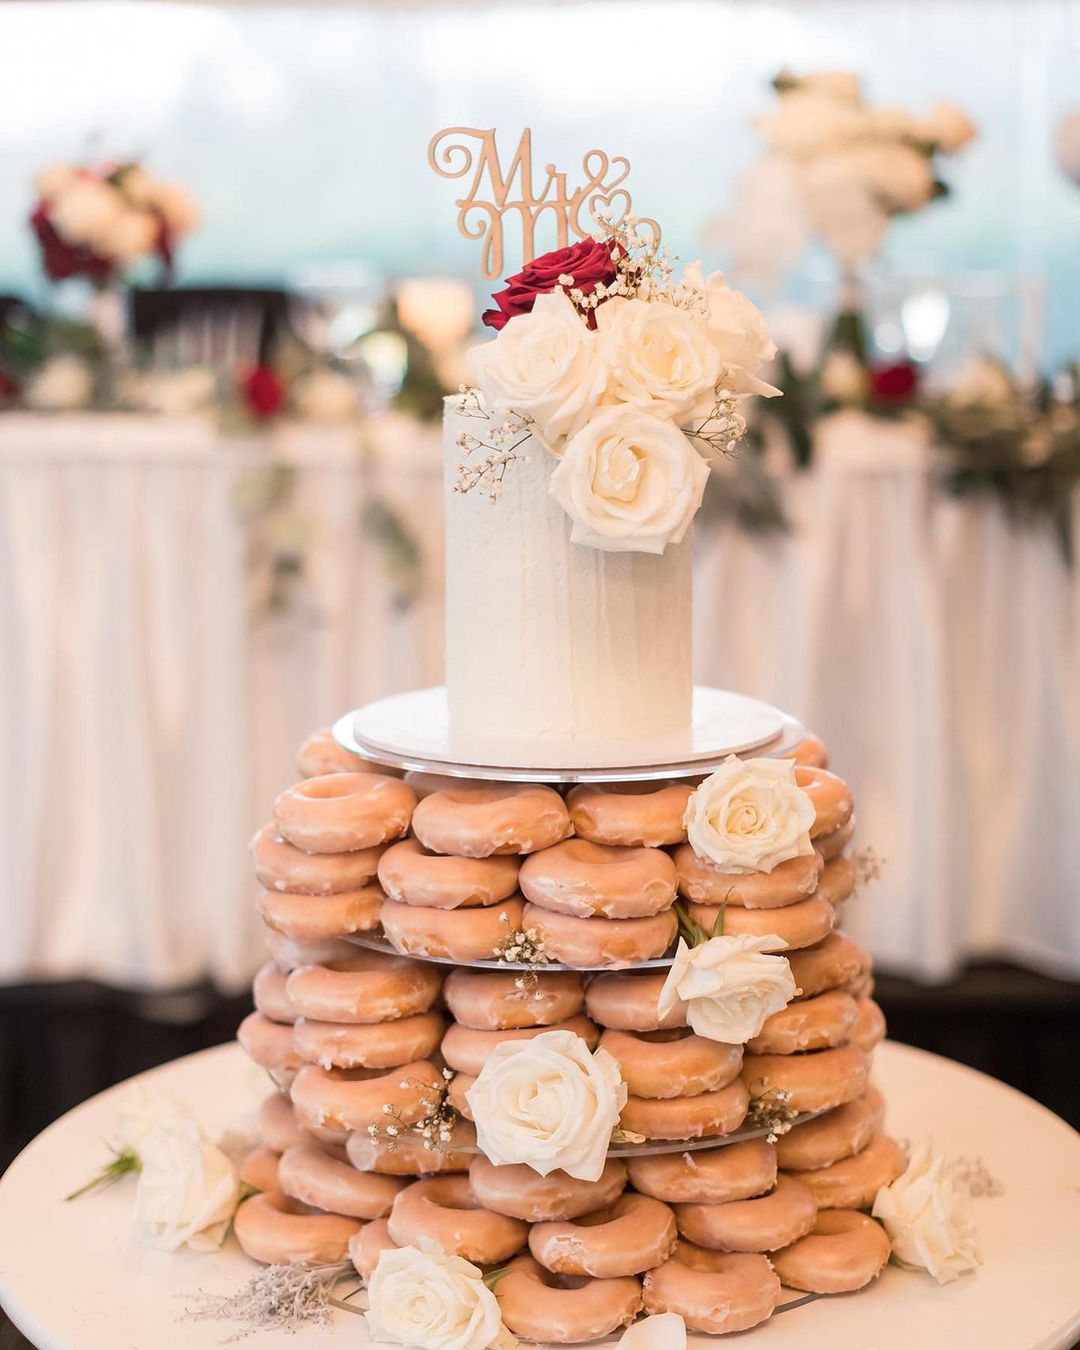 donuts tower with one small wedding cake via sprinkles_2_crumbs